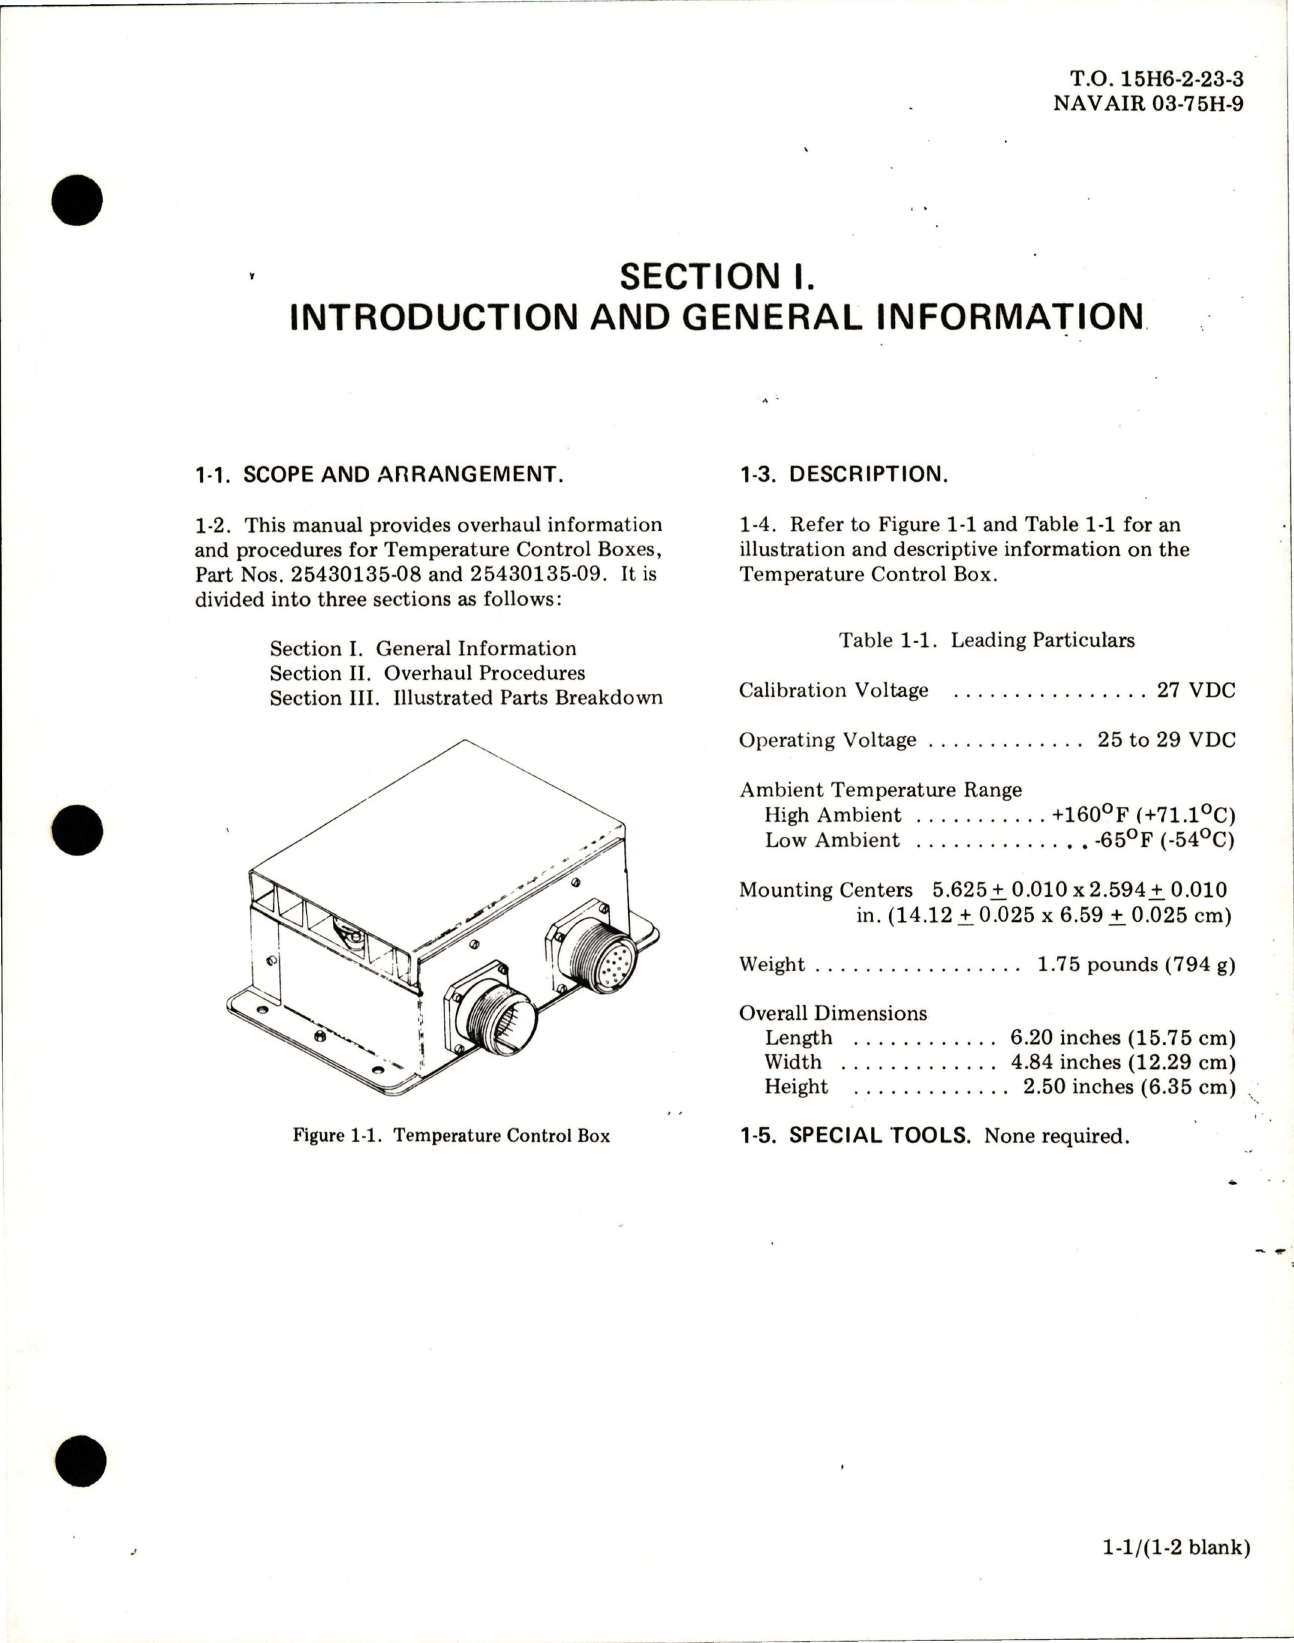 Sample page 5 from AirCorps Library document: Overhaul Instructions with Illustrated Parts Breakdown for Temperature Control Box - Parts 25430135-08, 25430135-09